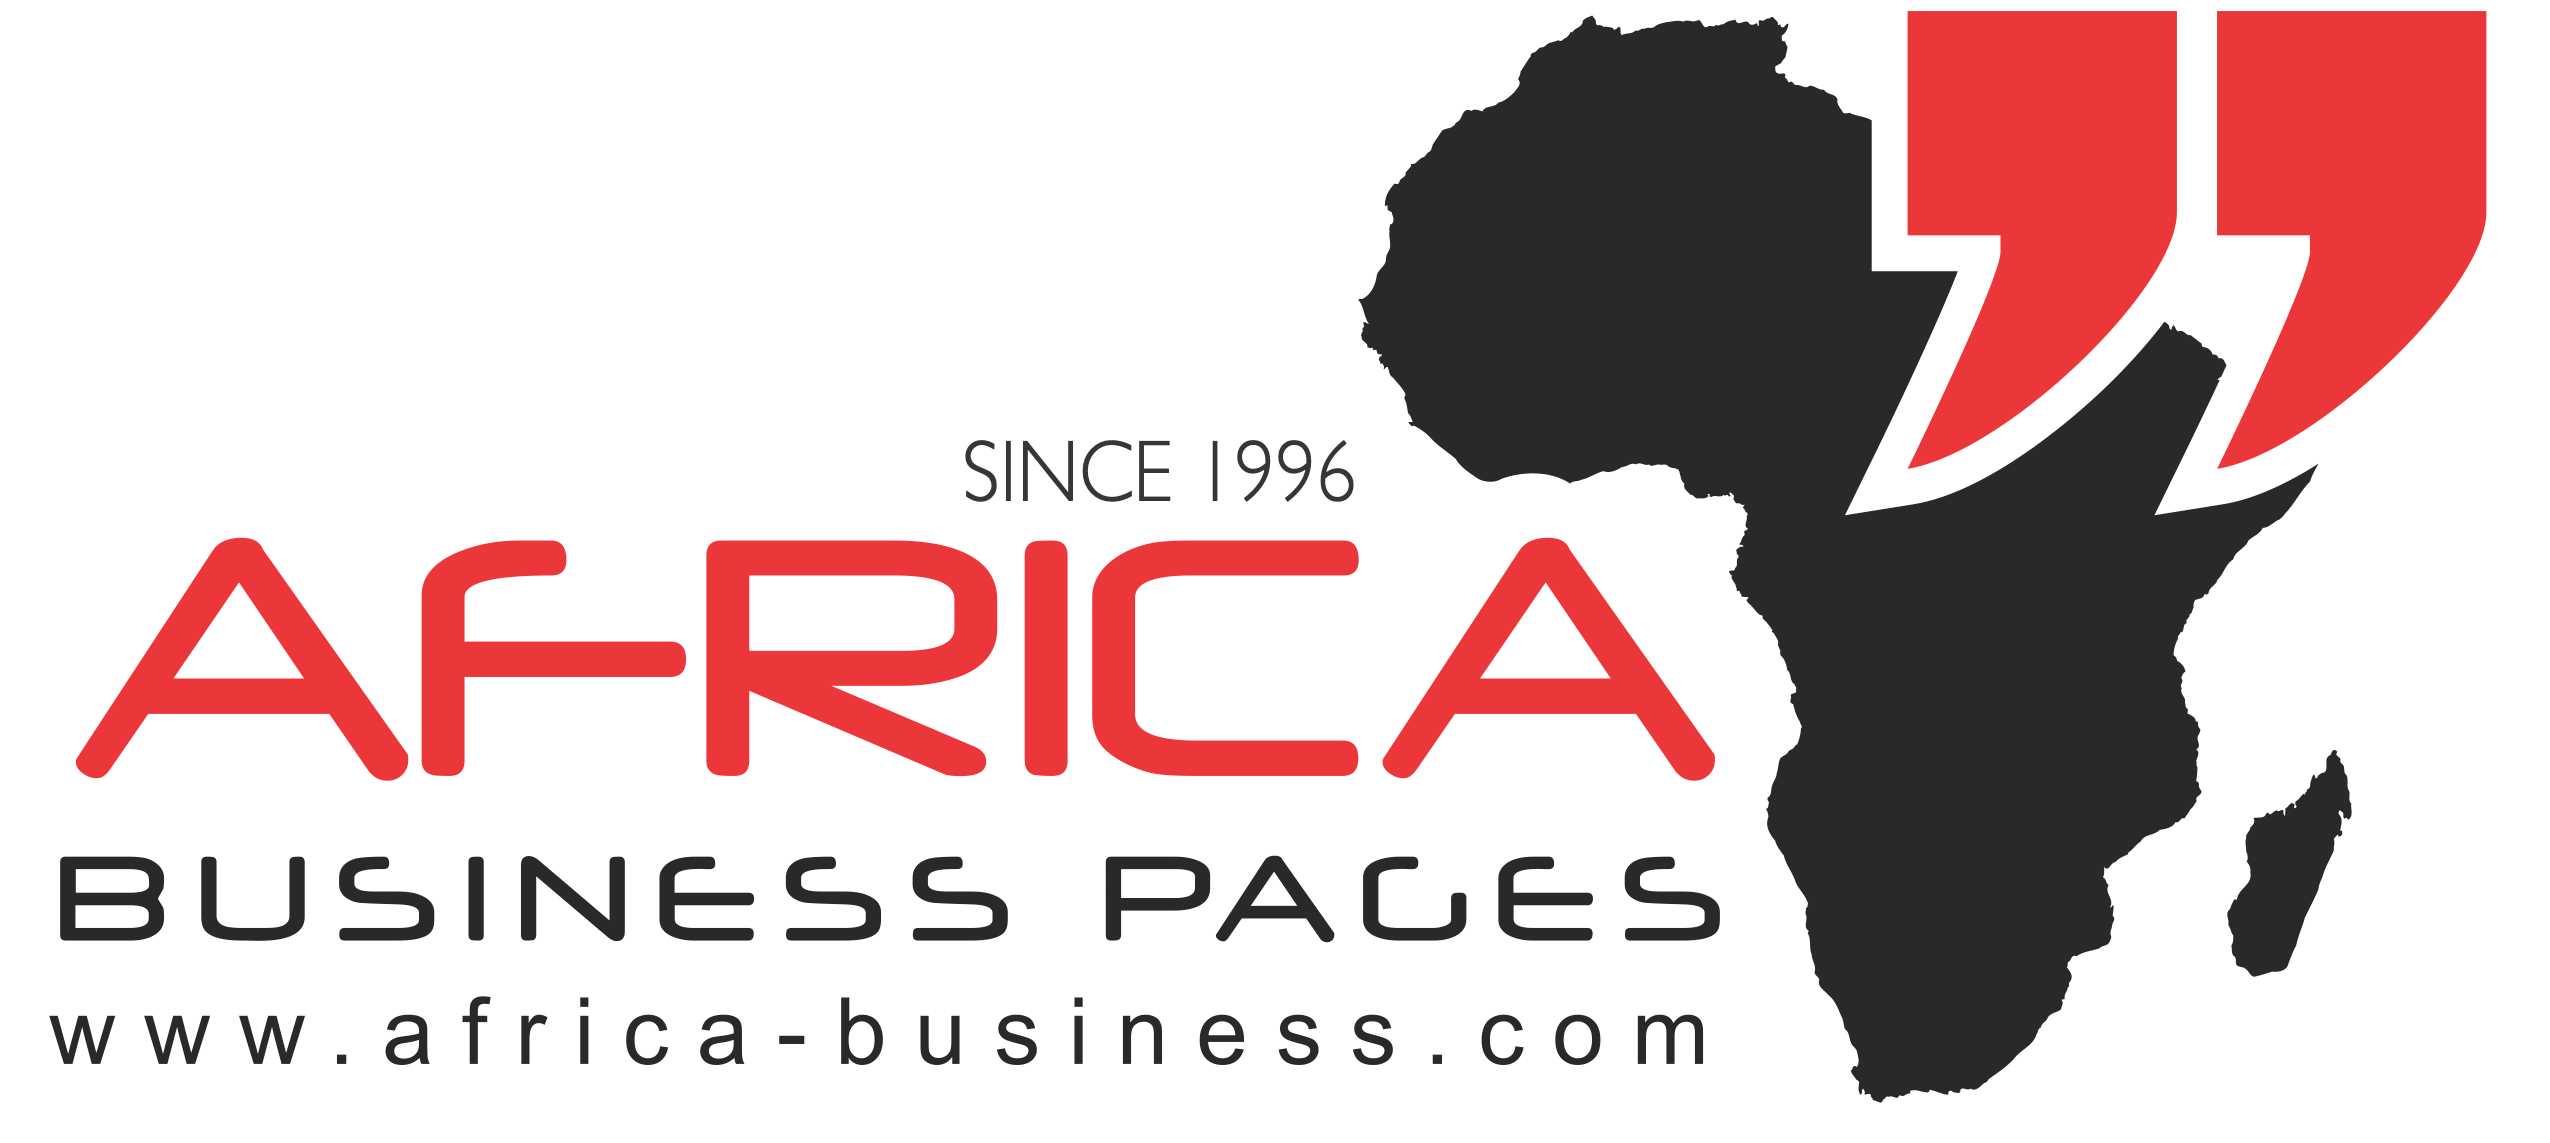 Africa Business Pages logo